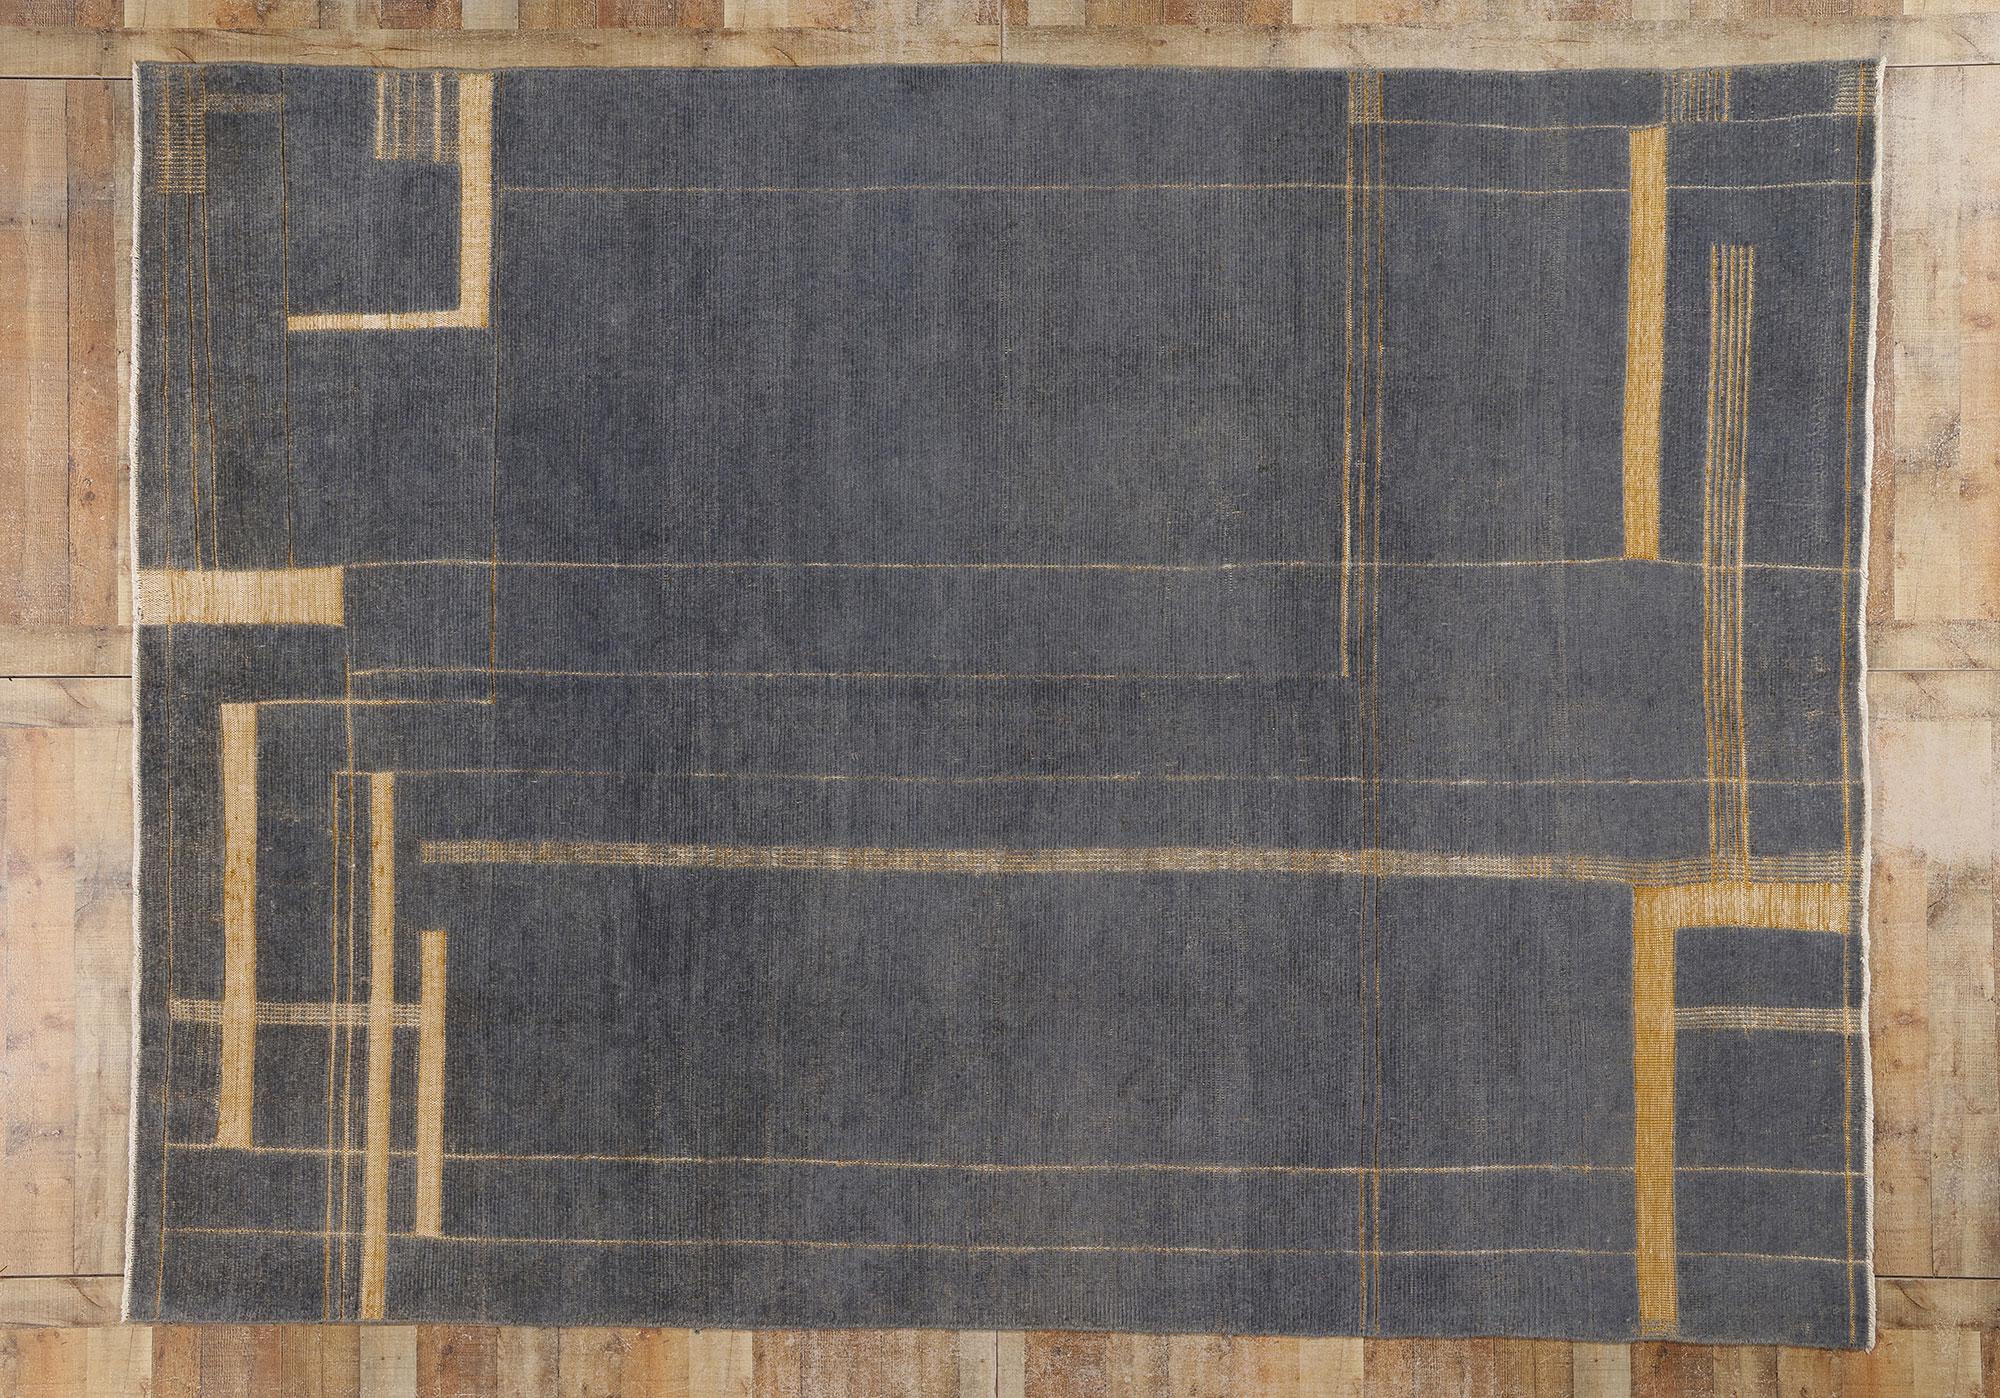 81058 Distressed Modern Brutalist Moroccan Area Rug, 08'06 x 11'07. Reflecting elements of both Organic Modern style and Brutalism, this hand knotted wool slate colored Moroccan area rug embodies a captivating fusion of raw texture and intricate